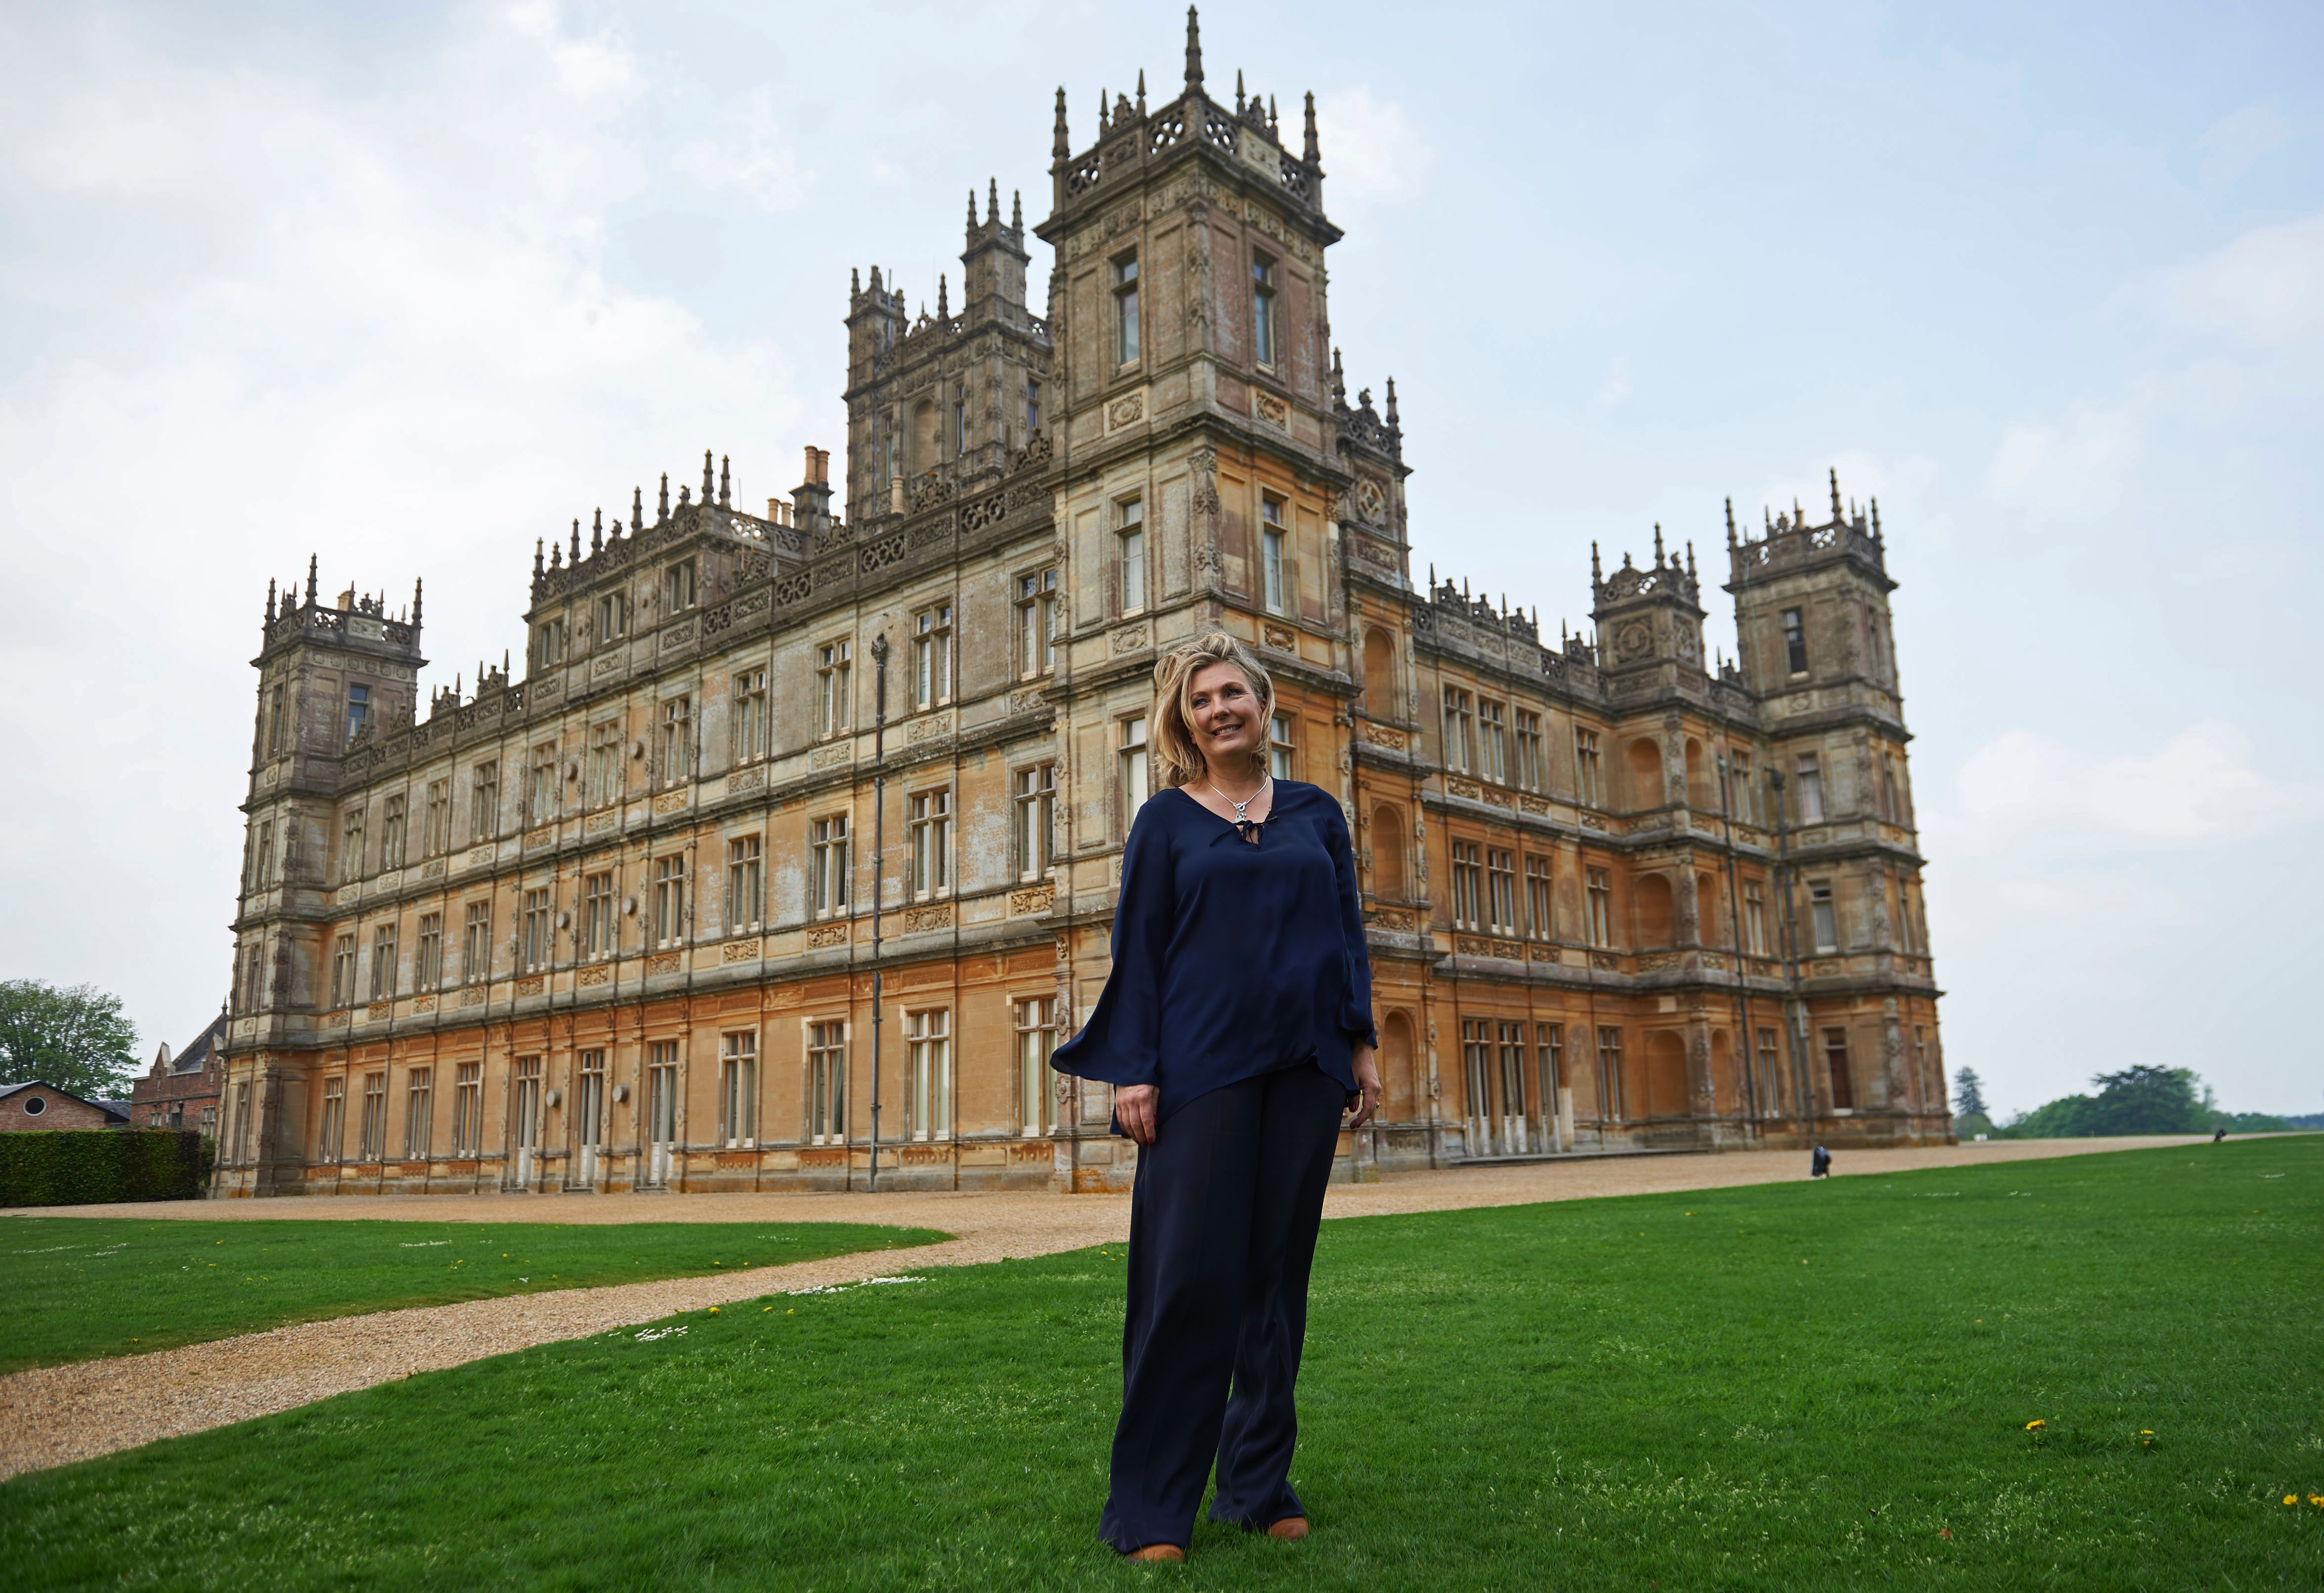 There is no doubt that Covid and Brexit have undermined the wedding industry at Highclere